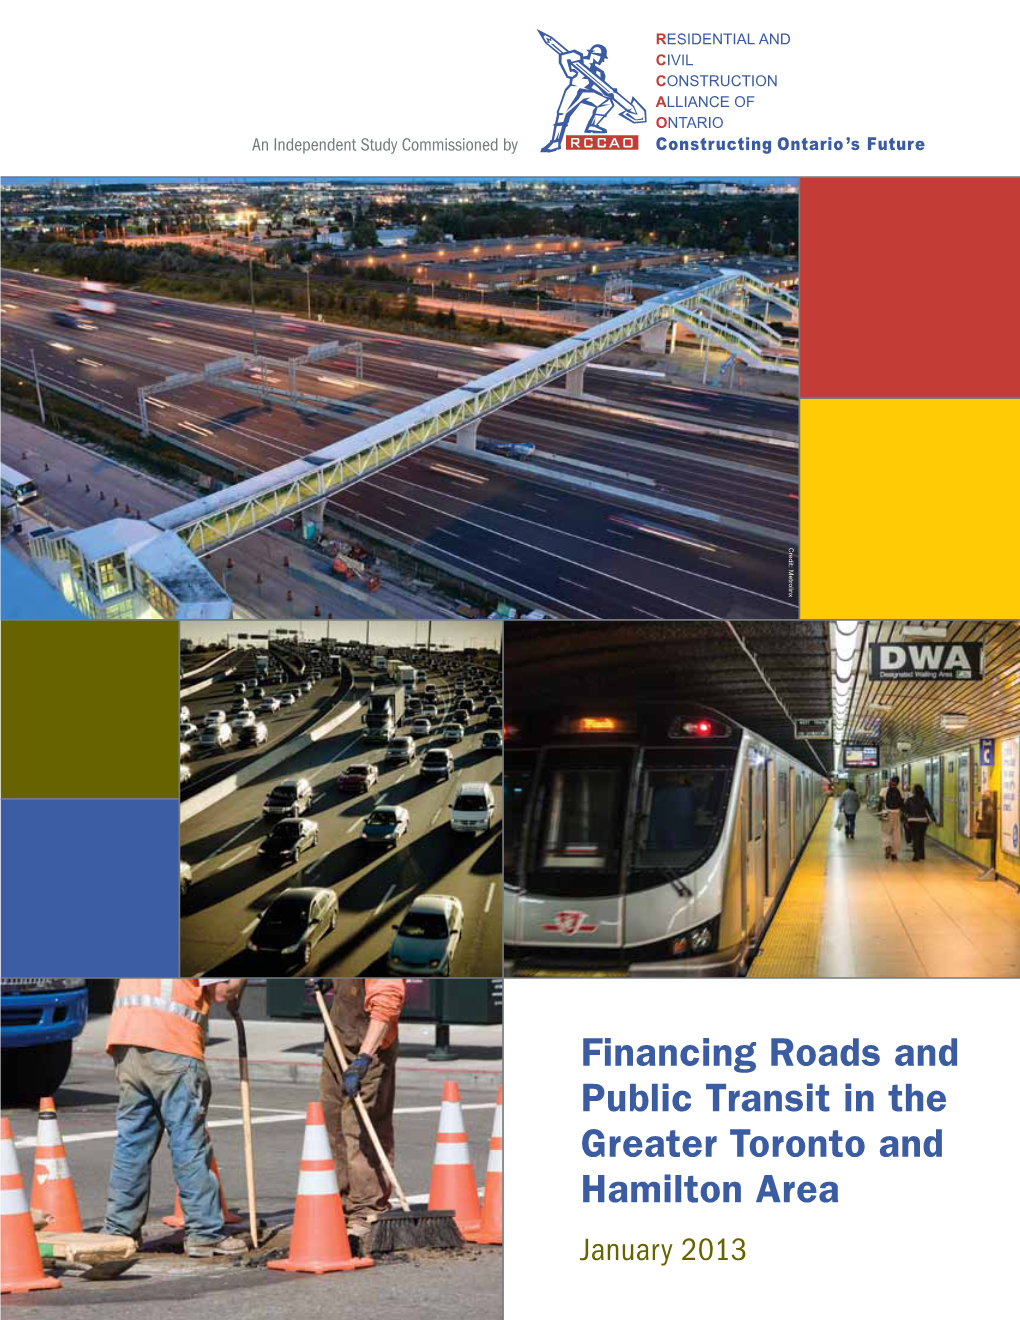 Financing Roads and Public Transit in the Greater Toronto and Hamilton Area January 2013